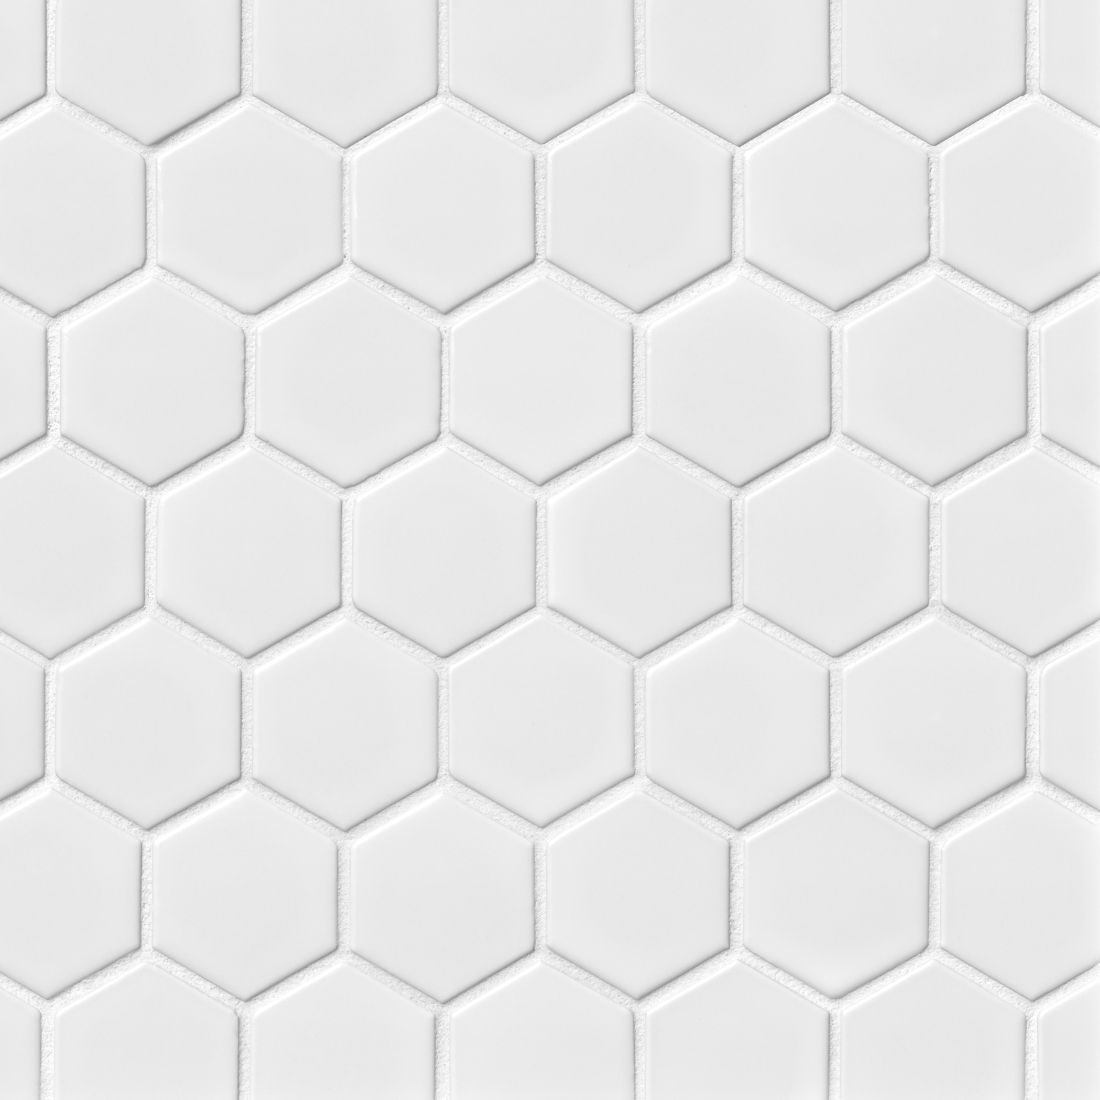 Hex Gloss White Porcelain Mosaic Tile - 2 x 2 in. - The Tile Shop